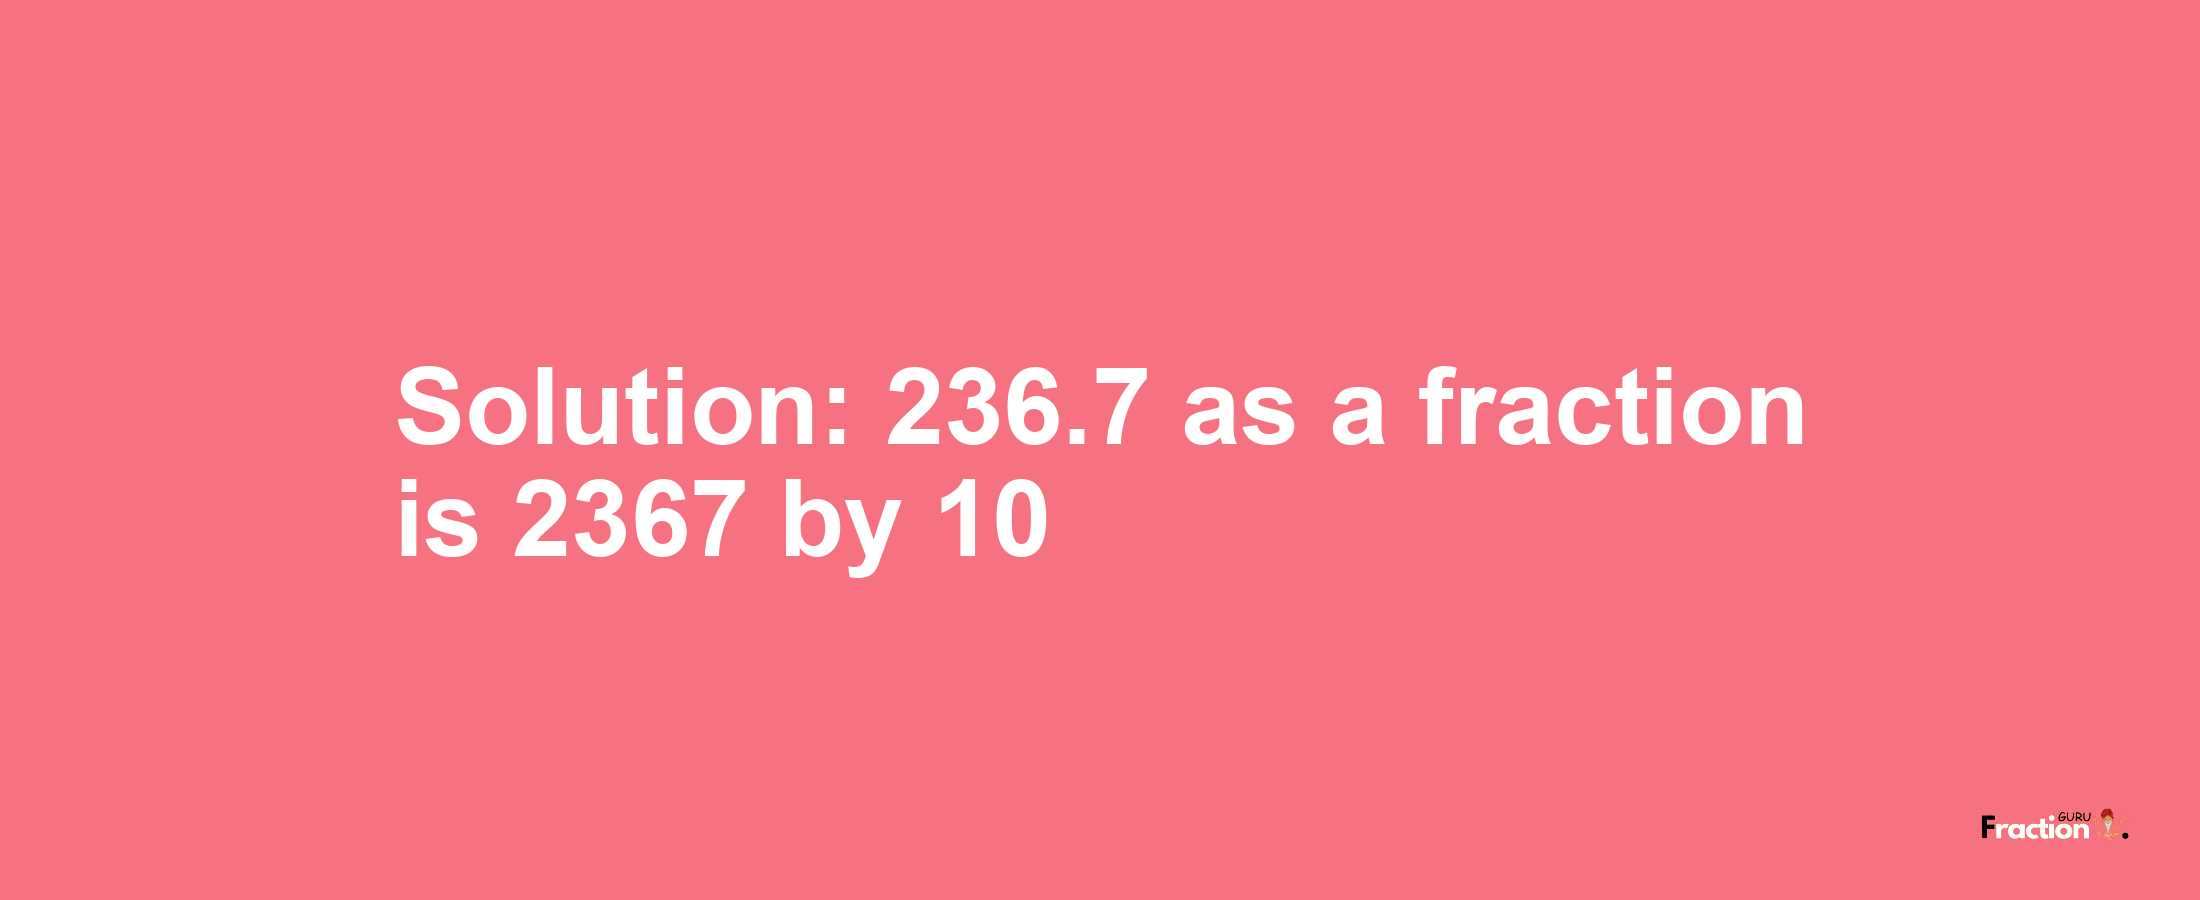 Solution:236.7 as a fraction is 2367/10